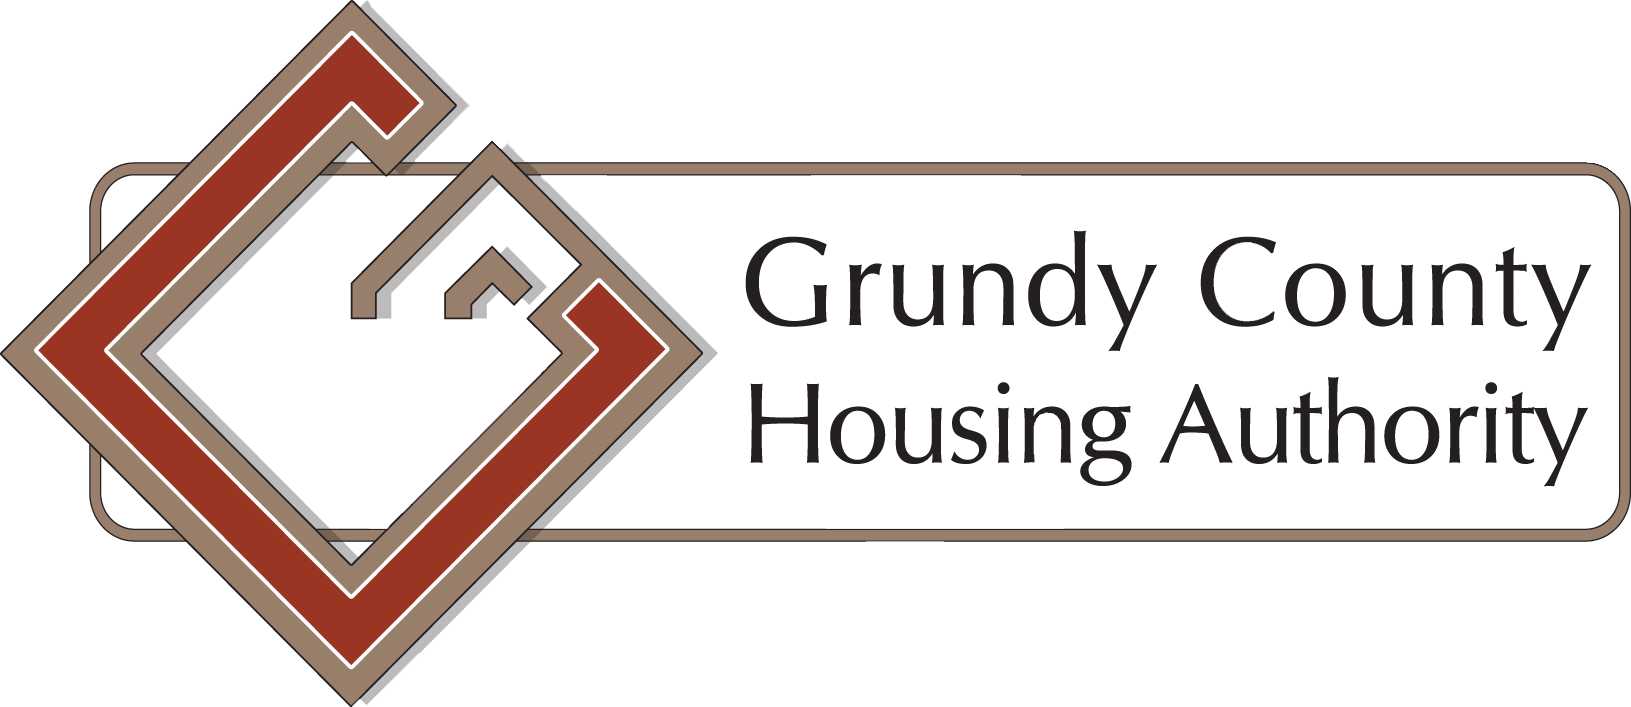 Grundy County Housing Authority